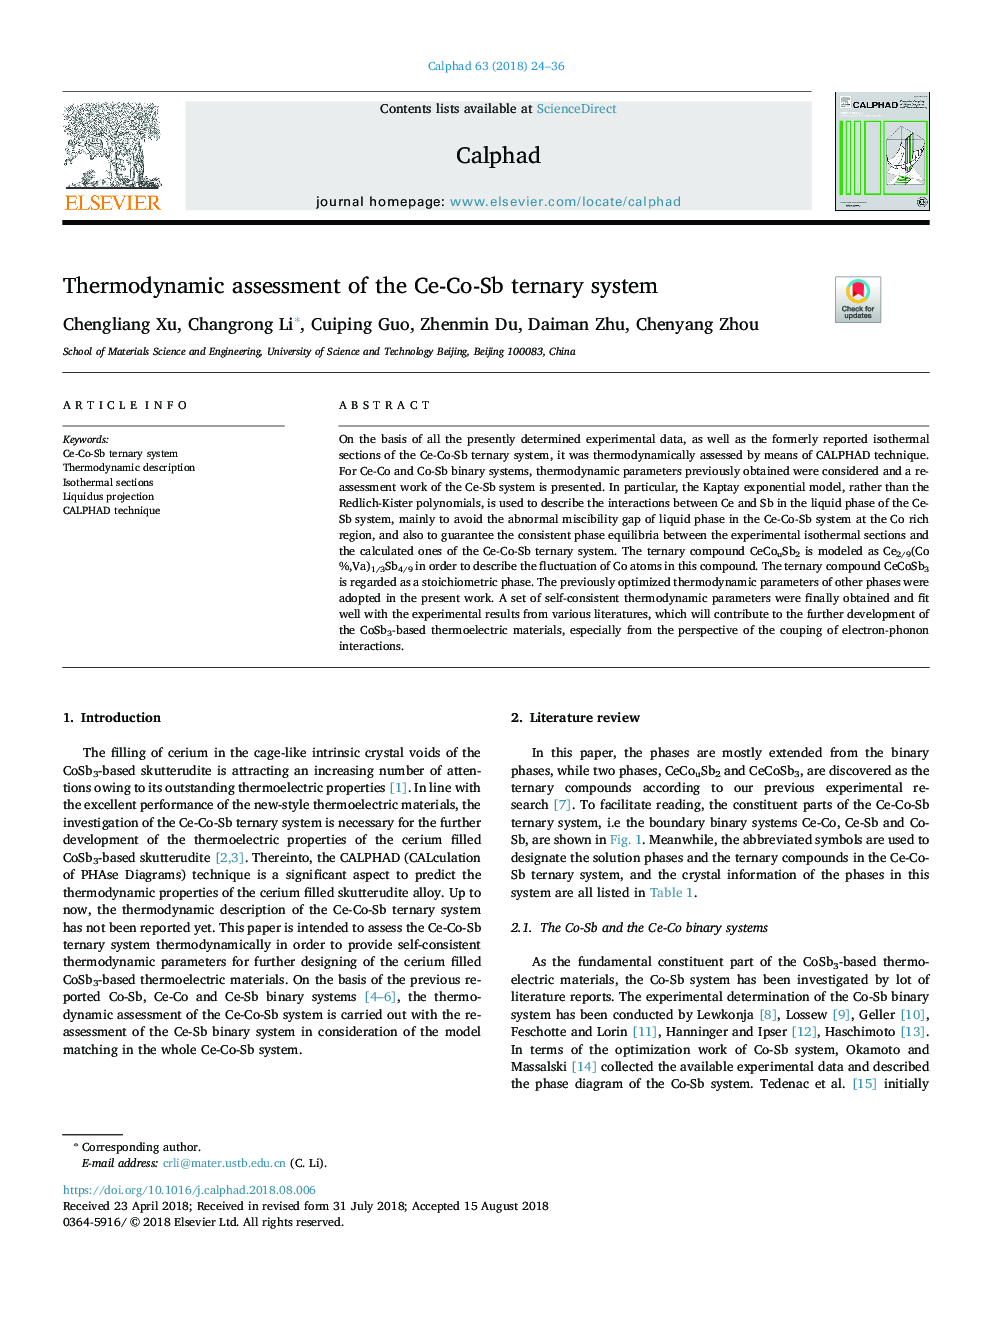 Thermodynamic assessment of the Ce-Co-Sb ternary system